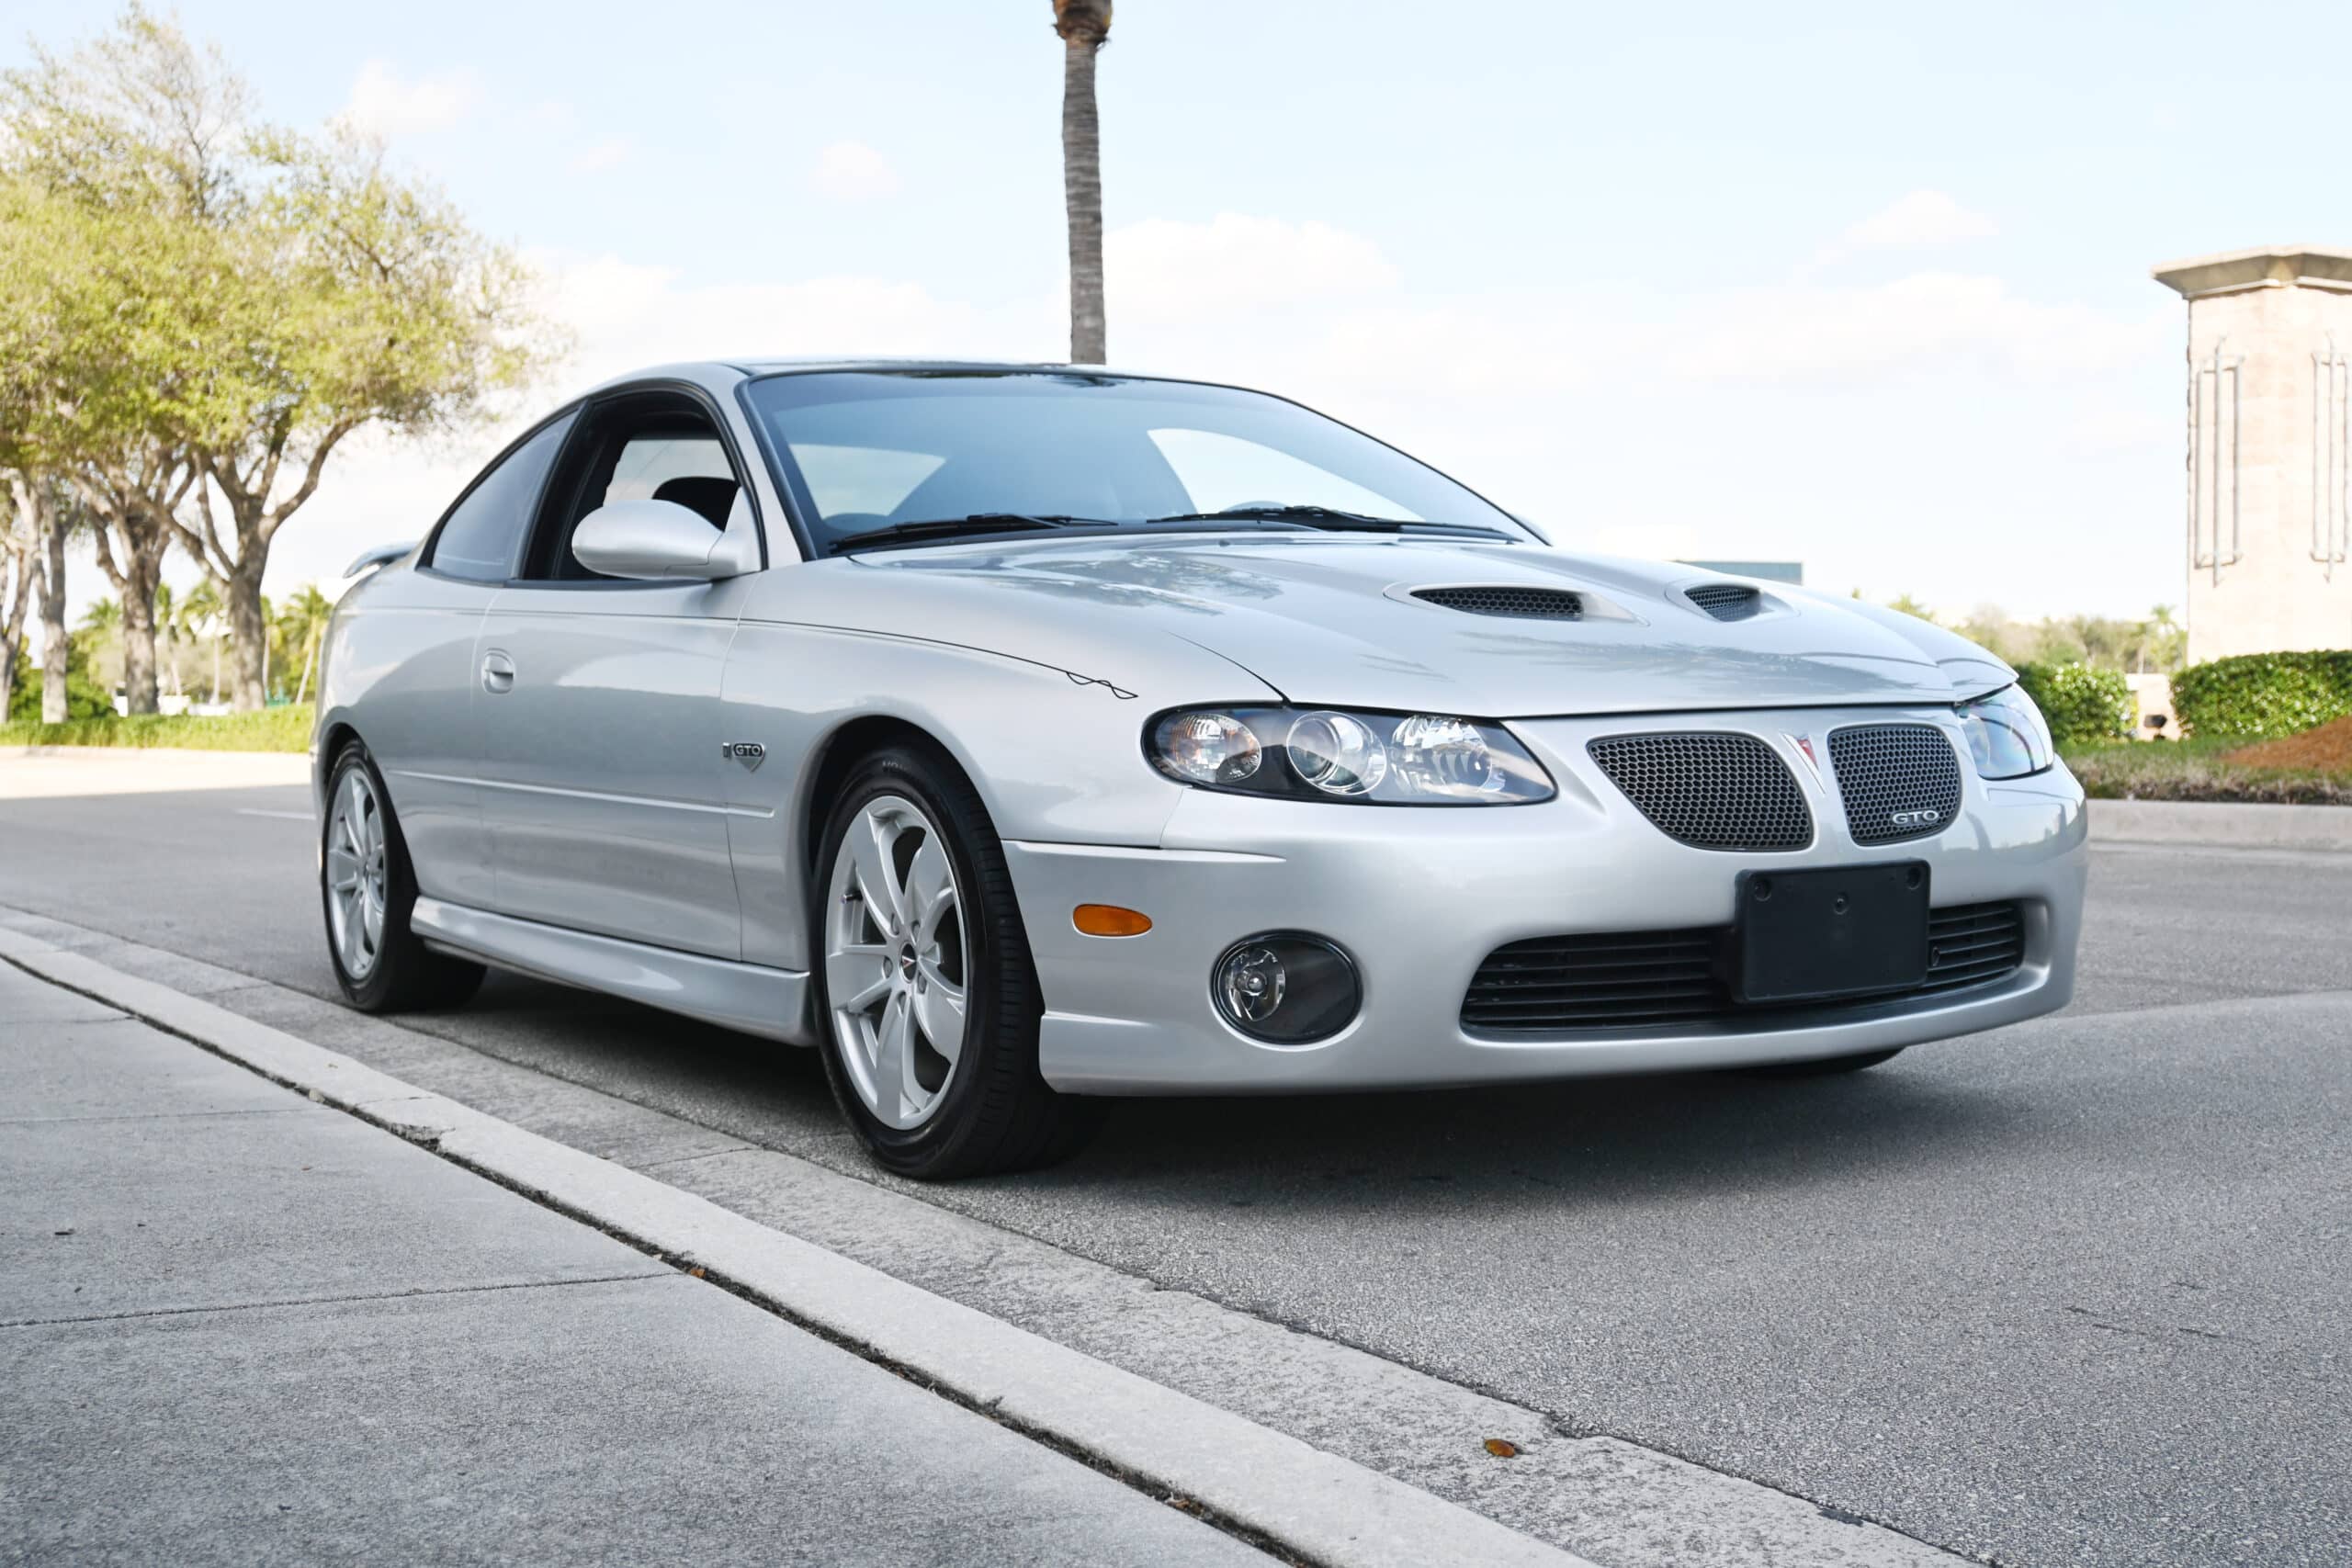 2005 Pontiac GTO, only 15K miles, same owner for 15 years, Magnuson Supercharger kit 550HP